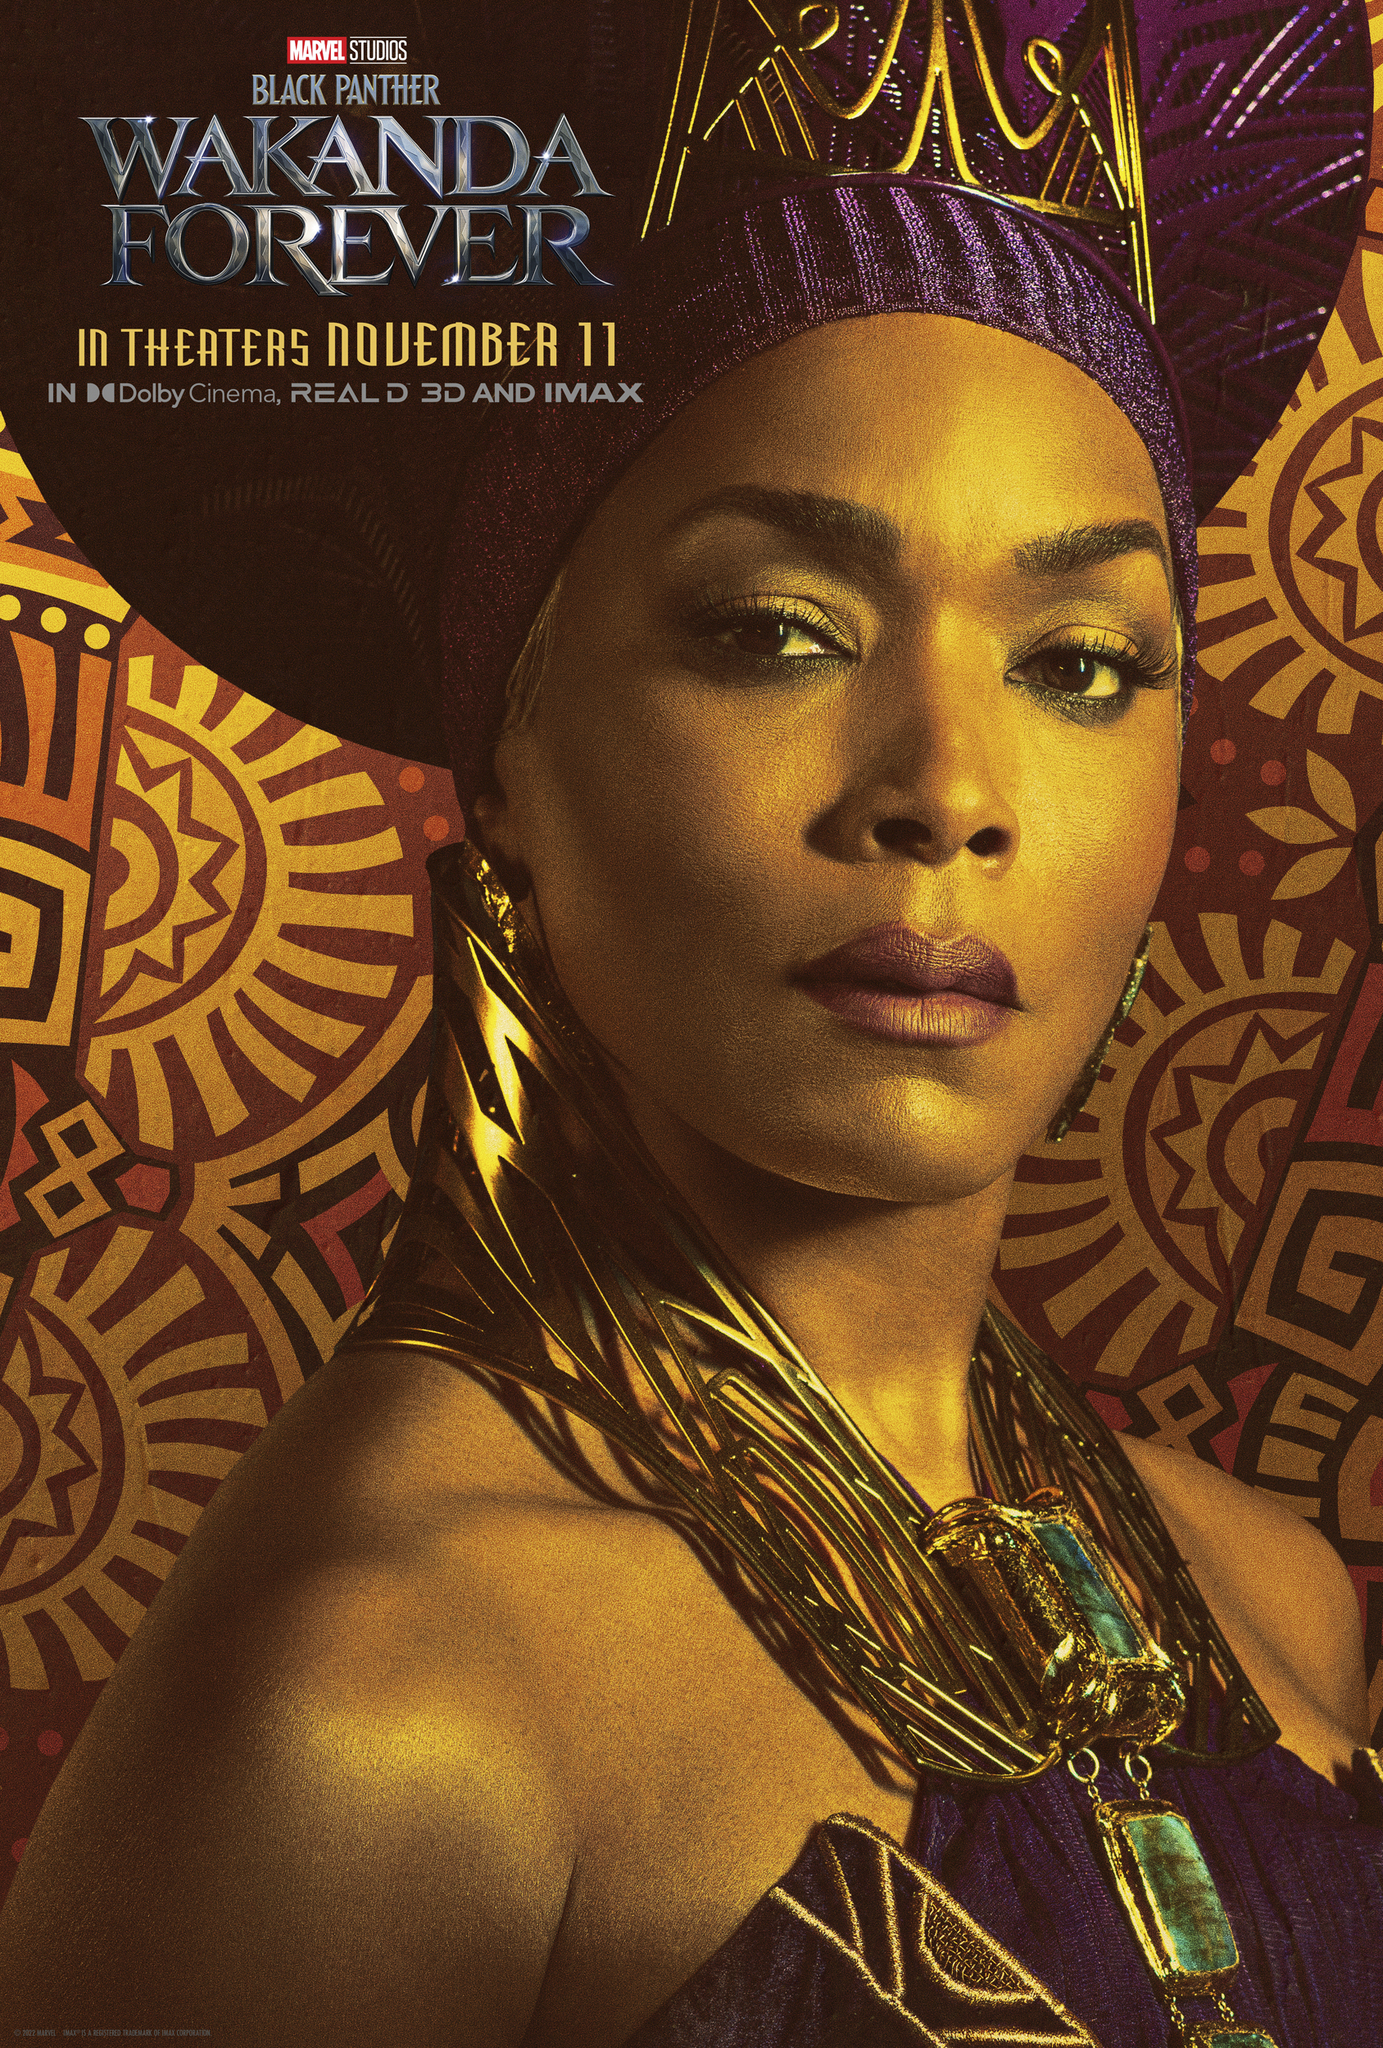 Black Panther: Wakanda Forever Character Posters